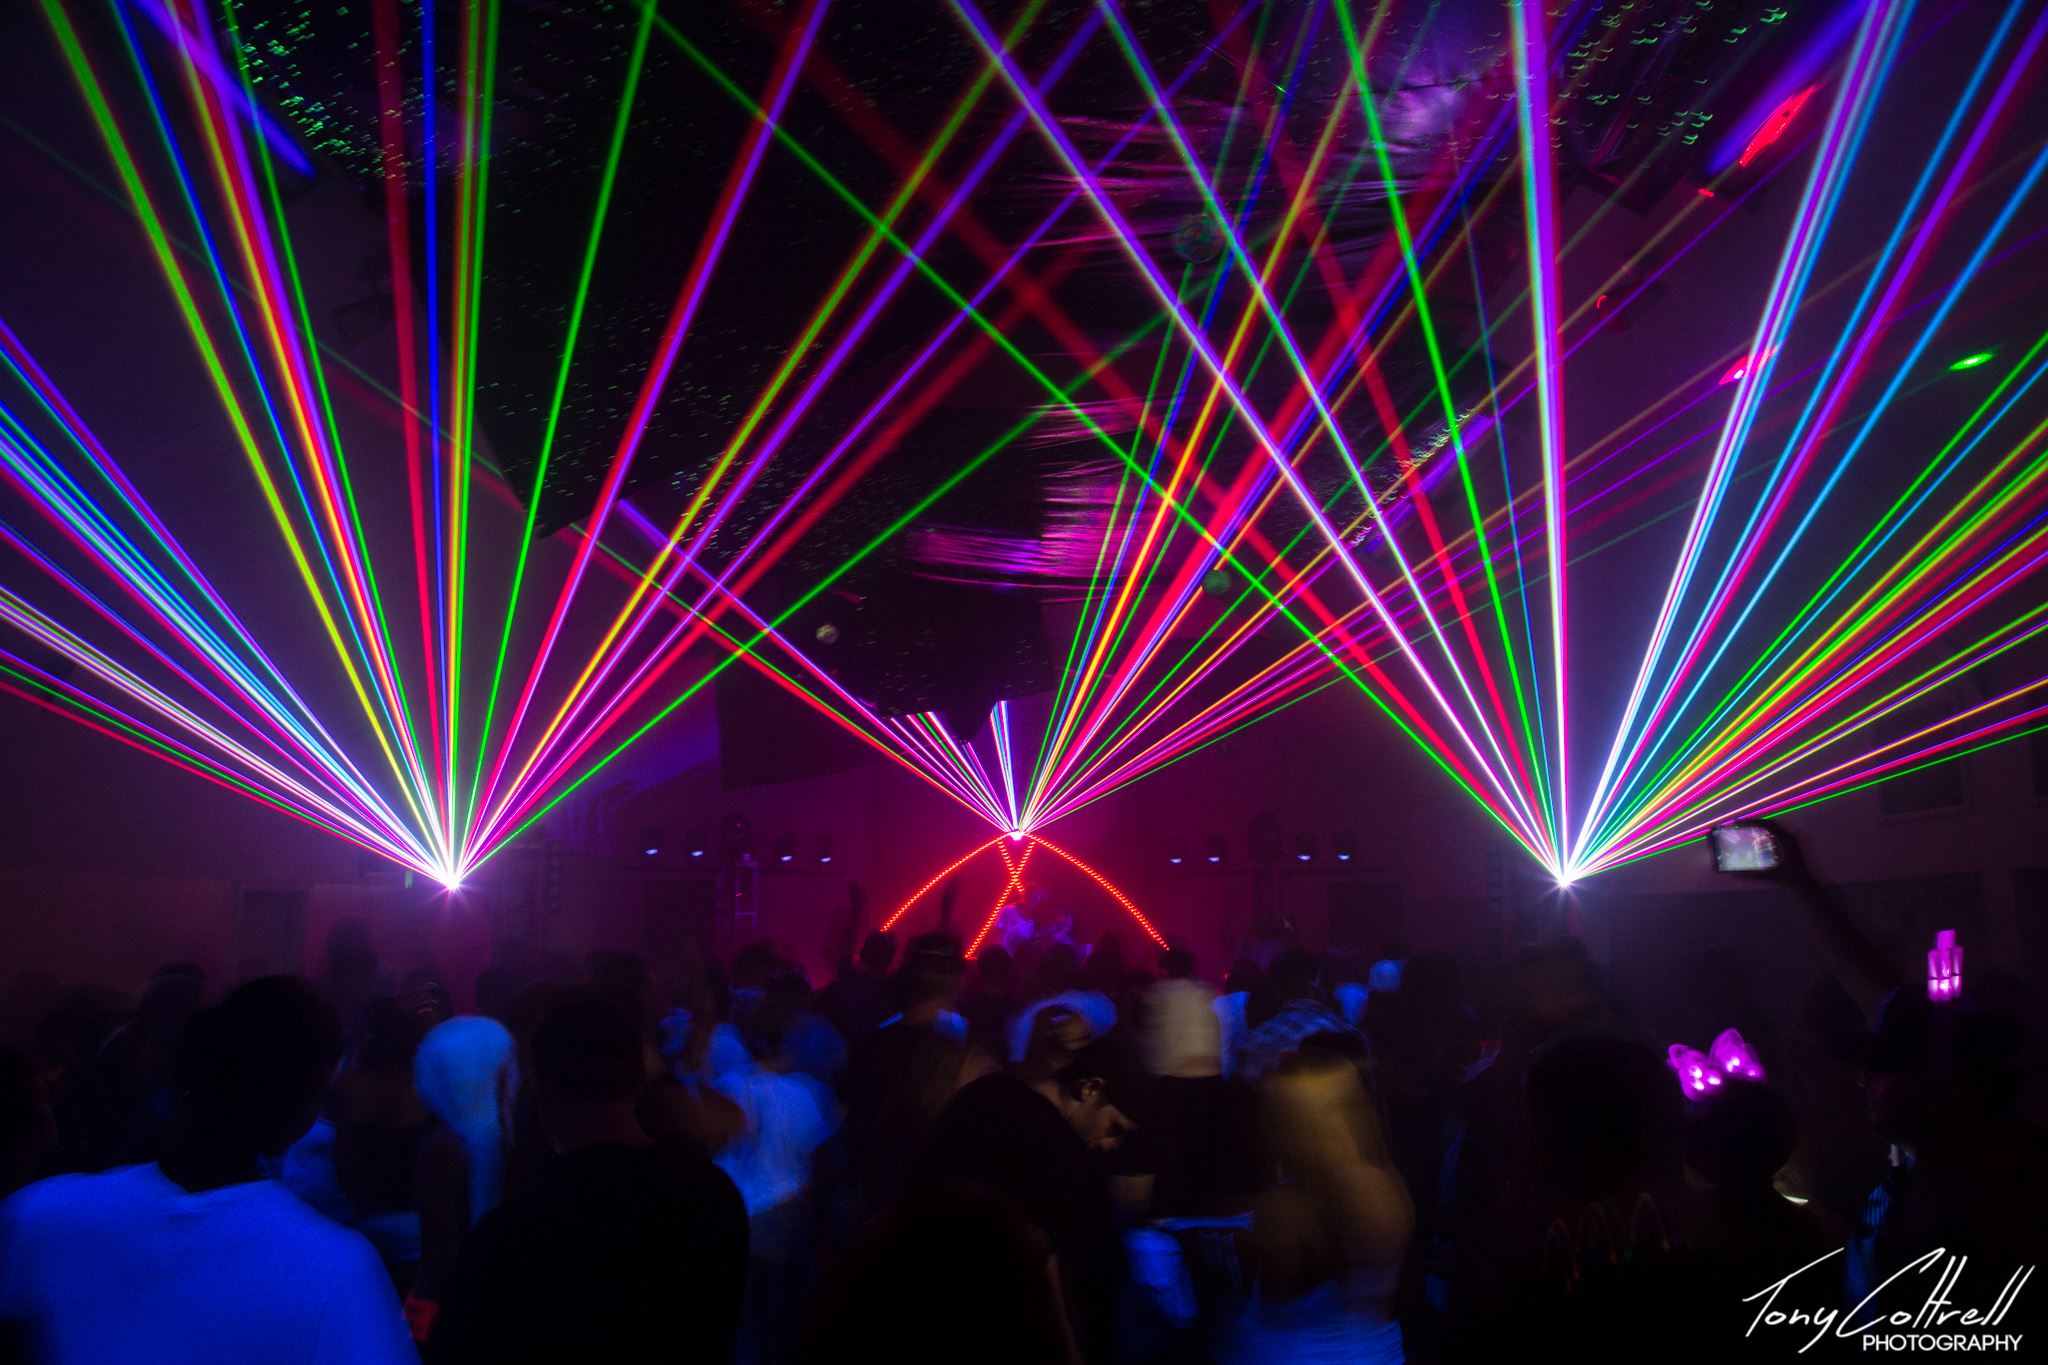 [Event Review] - Underground Rave Takes Ravers to a Galaxy Far, Far ...